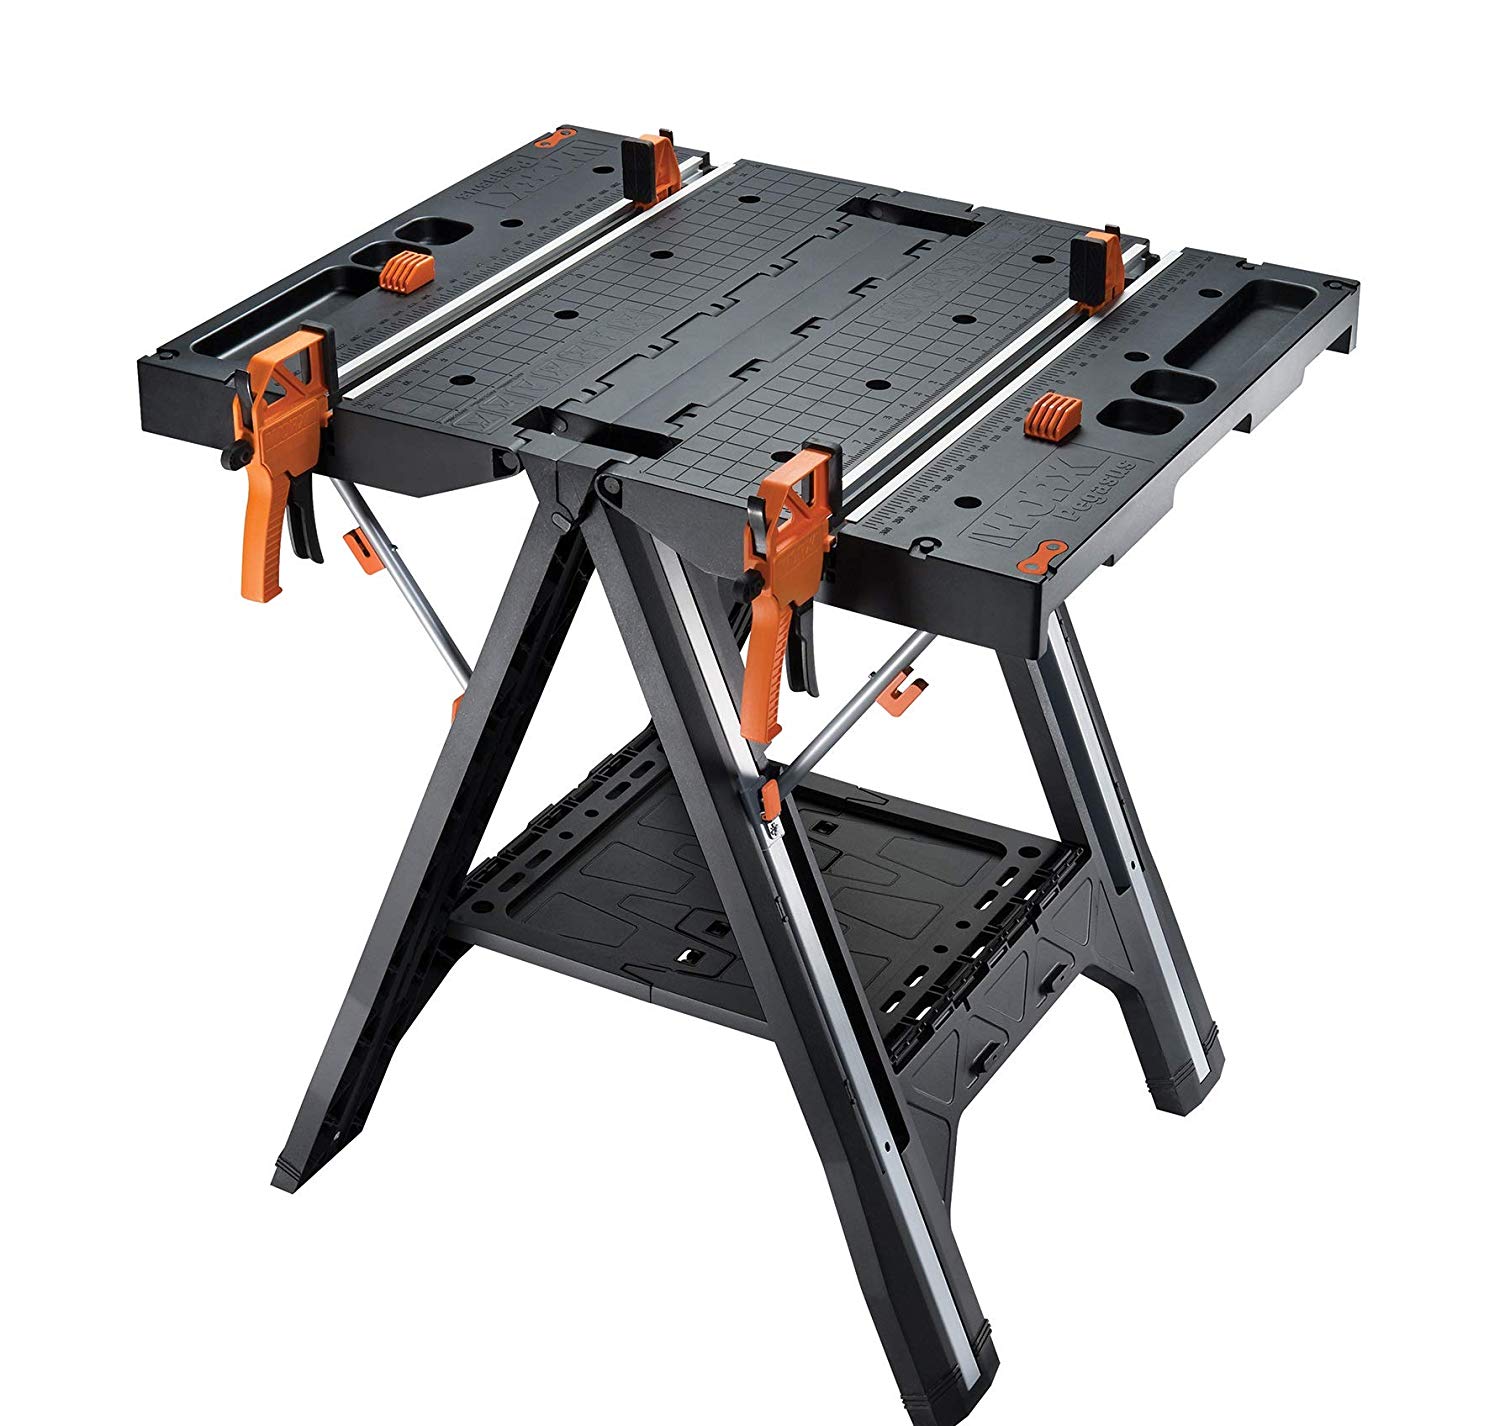 WORX Pegasus Multi-Function Work Table and Sawhorse with Quick Clamps and Holding Pegs – WX051 2